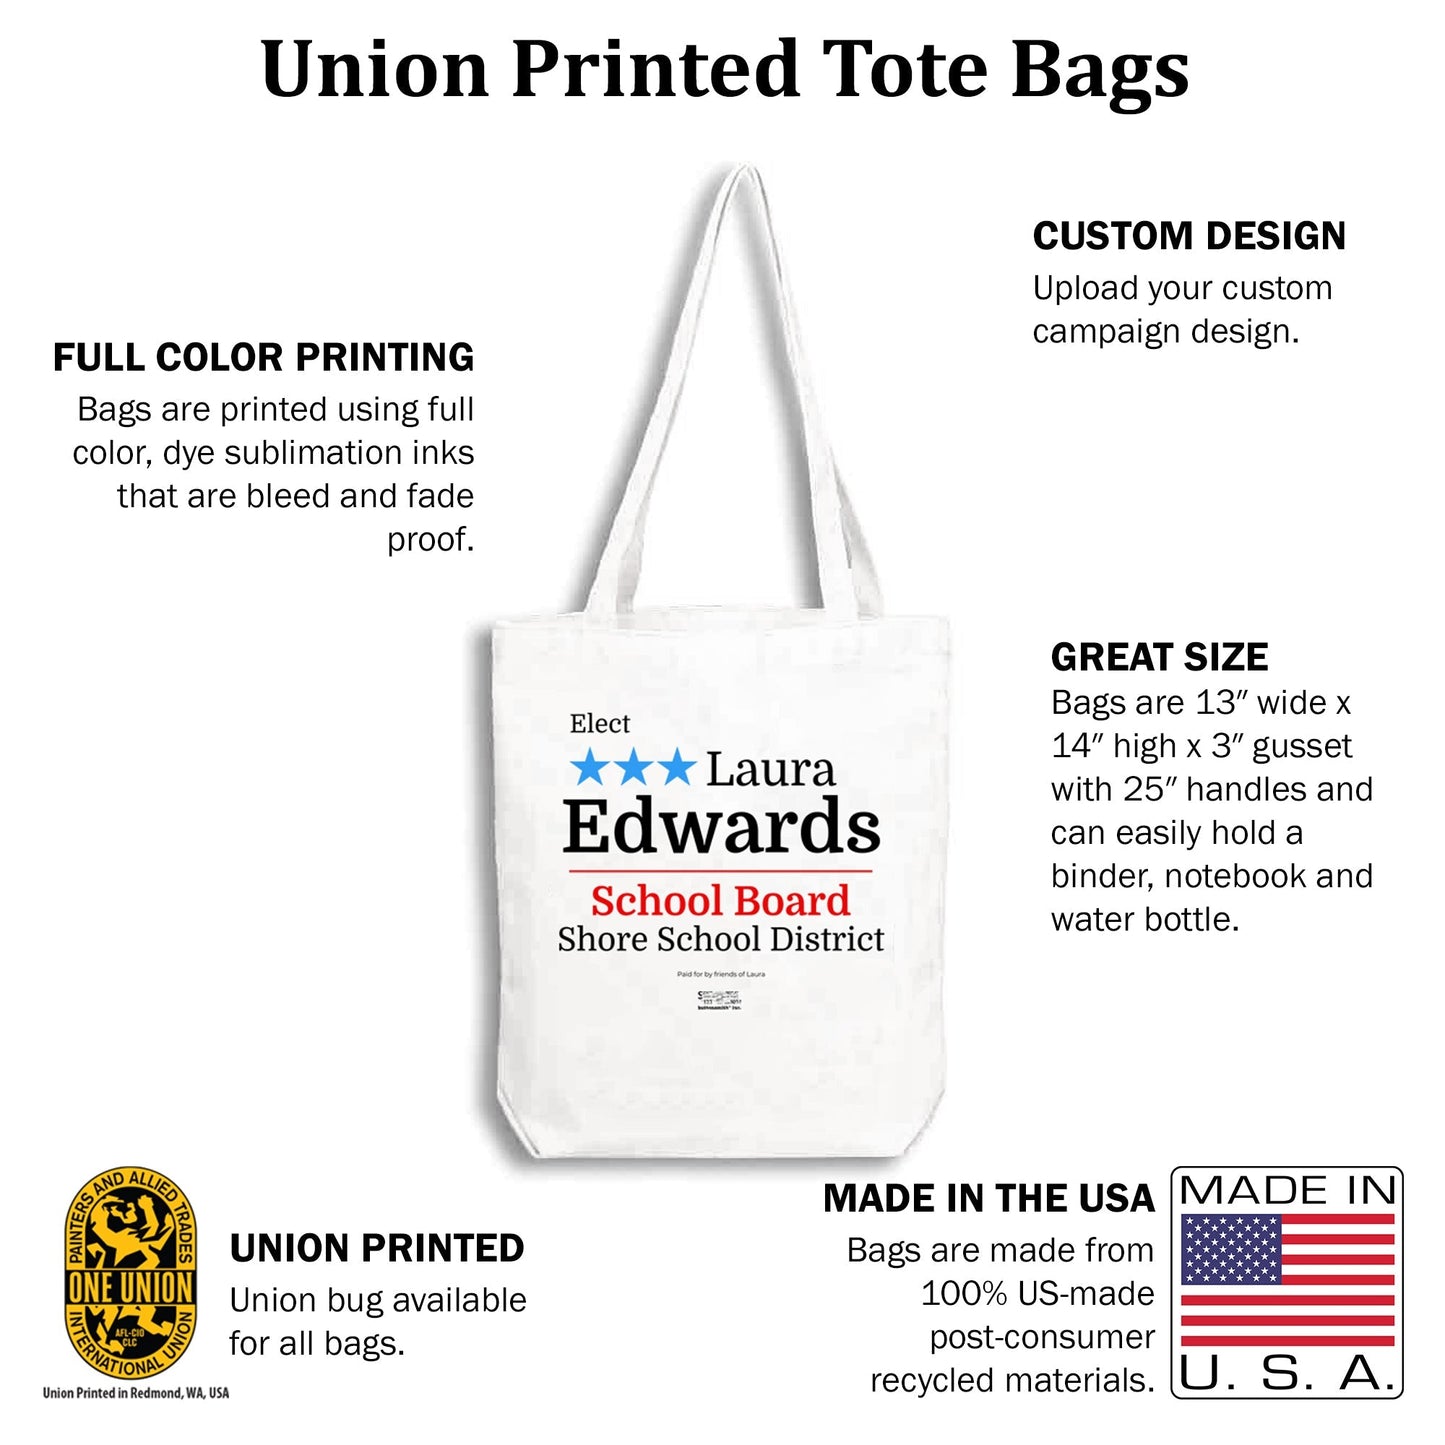 MerchBlue Union-Printed Tote bag - Custom image plus text - Made in the USA from recycled fabric